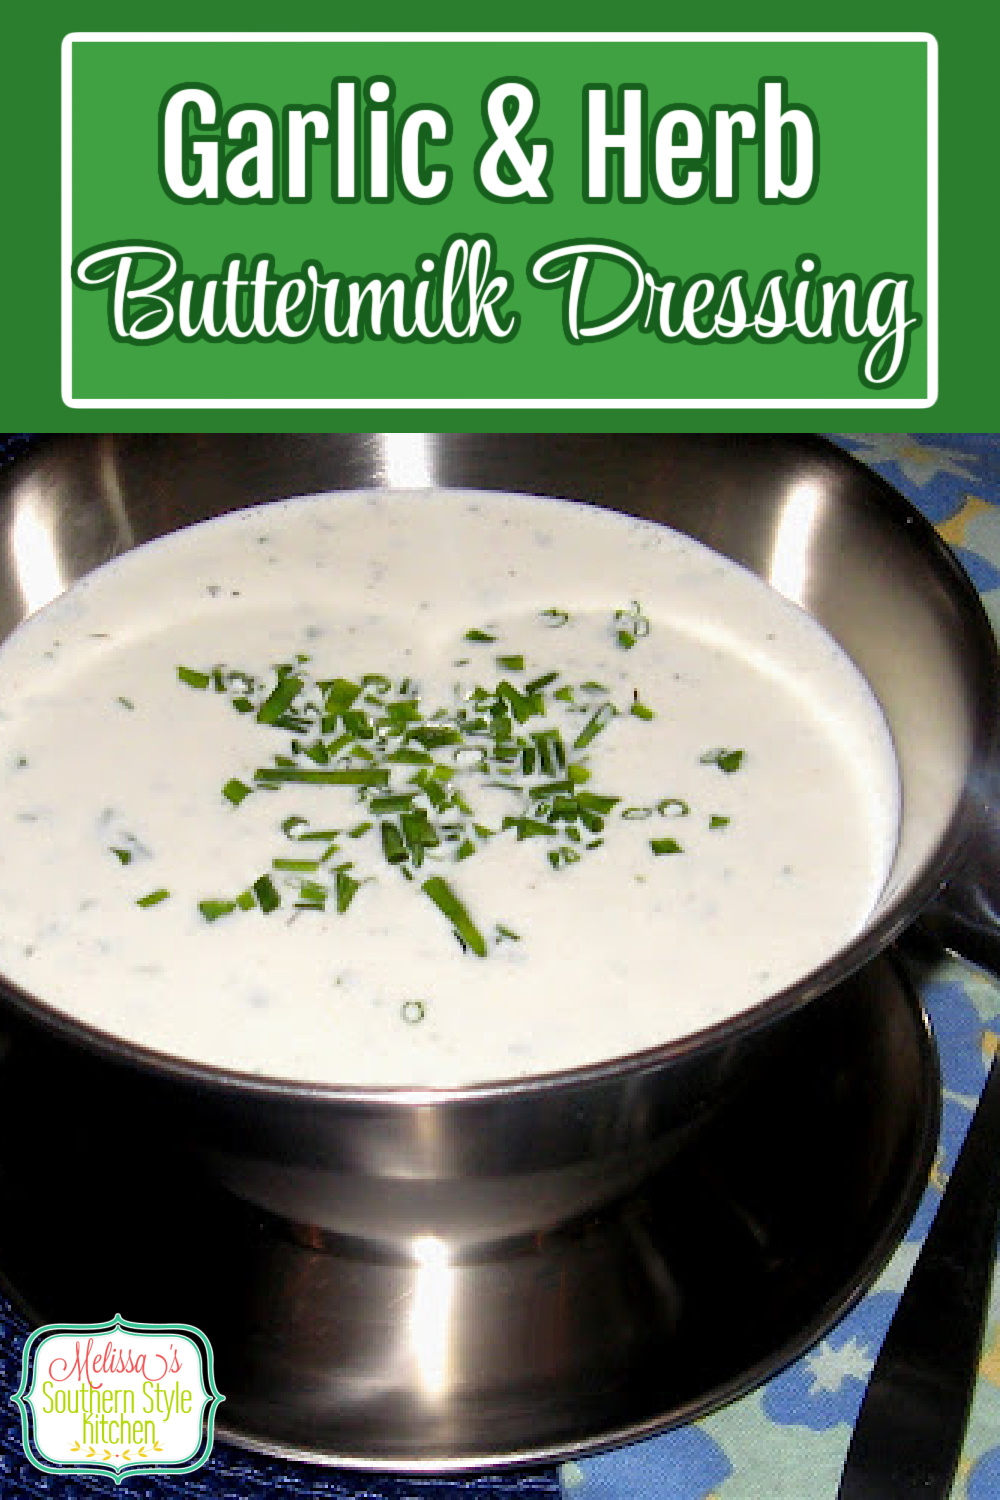 Homemade Garlic and Herb Buttermilk Dressing for salads and dipping #homemadedressing #buttermilkdressing #ranchdressing #bestdressingrecipes #southernfood #southernrecipes #melissassouthernstylekitchen #appetizers #dips